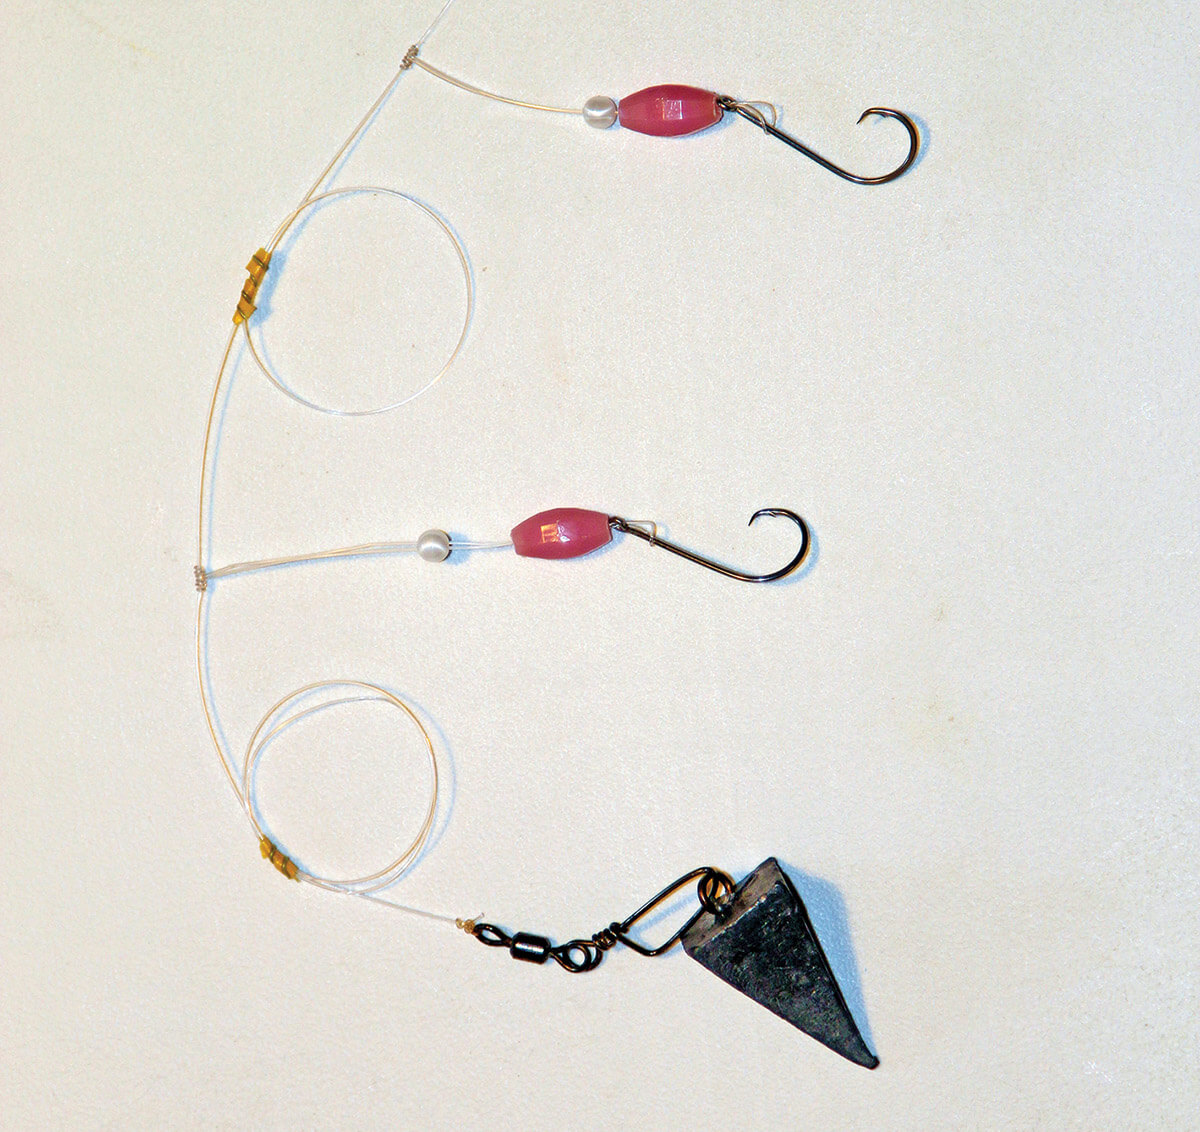 Pompano Rigs Saltwater Fishing Surf Fishing Rigs Lure Making Kit Bottom Rig  Parts Rig Floats Fishing Beads Circle Hooks Surf Fishing Accessories